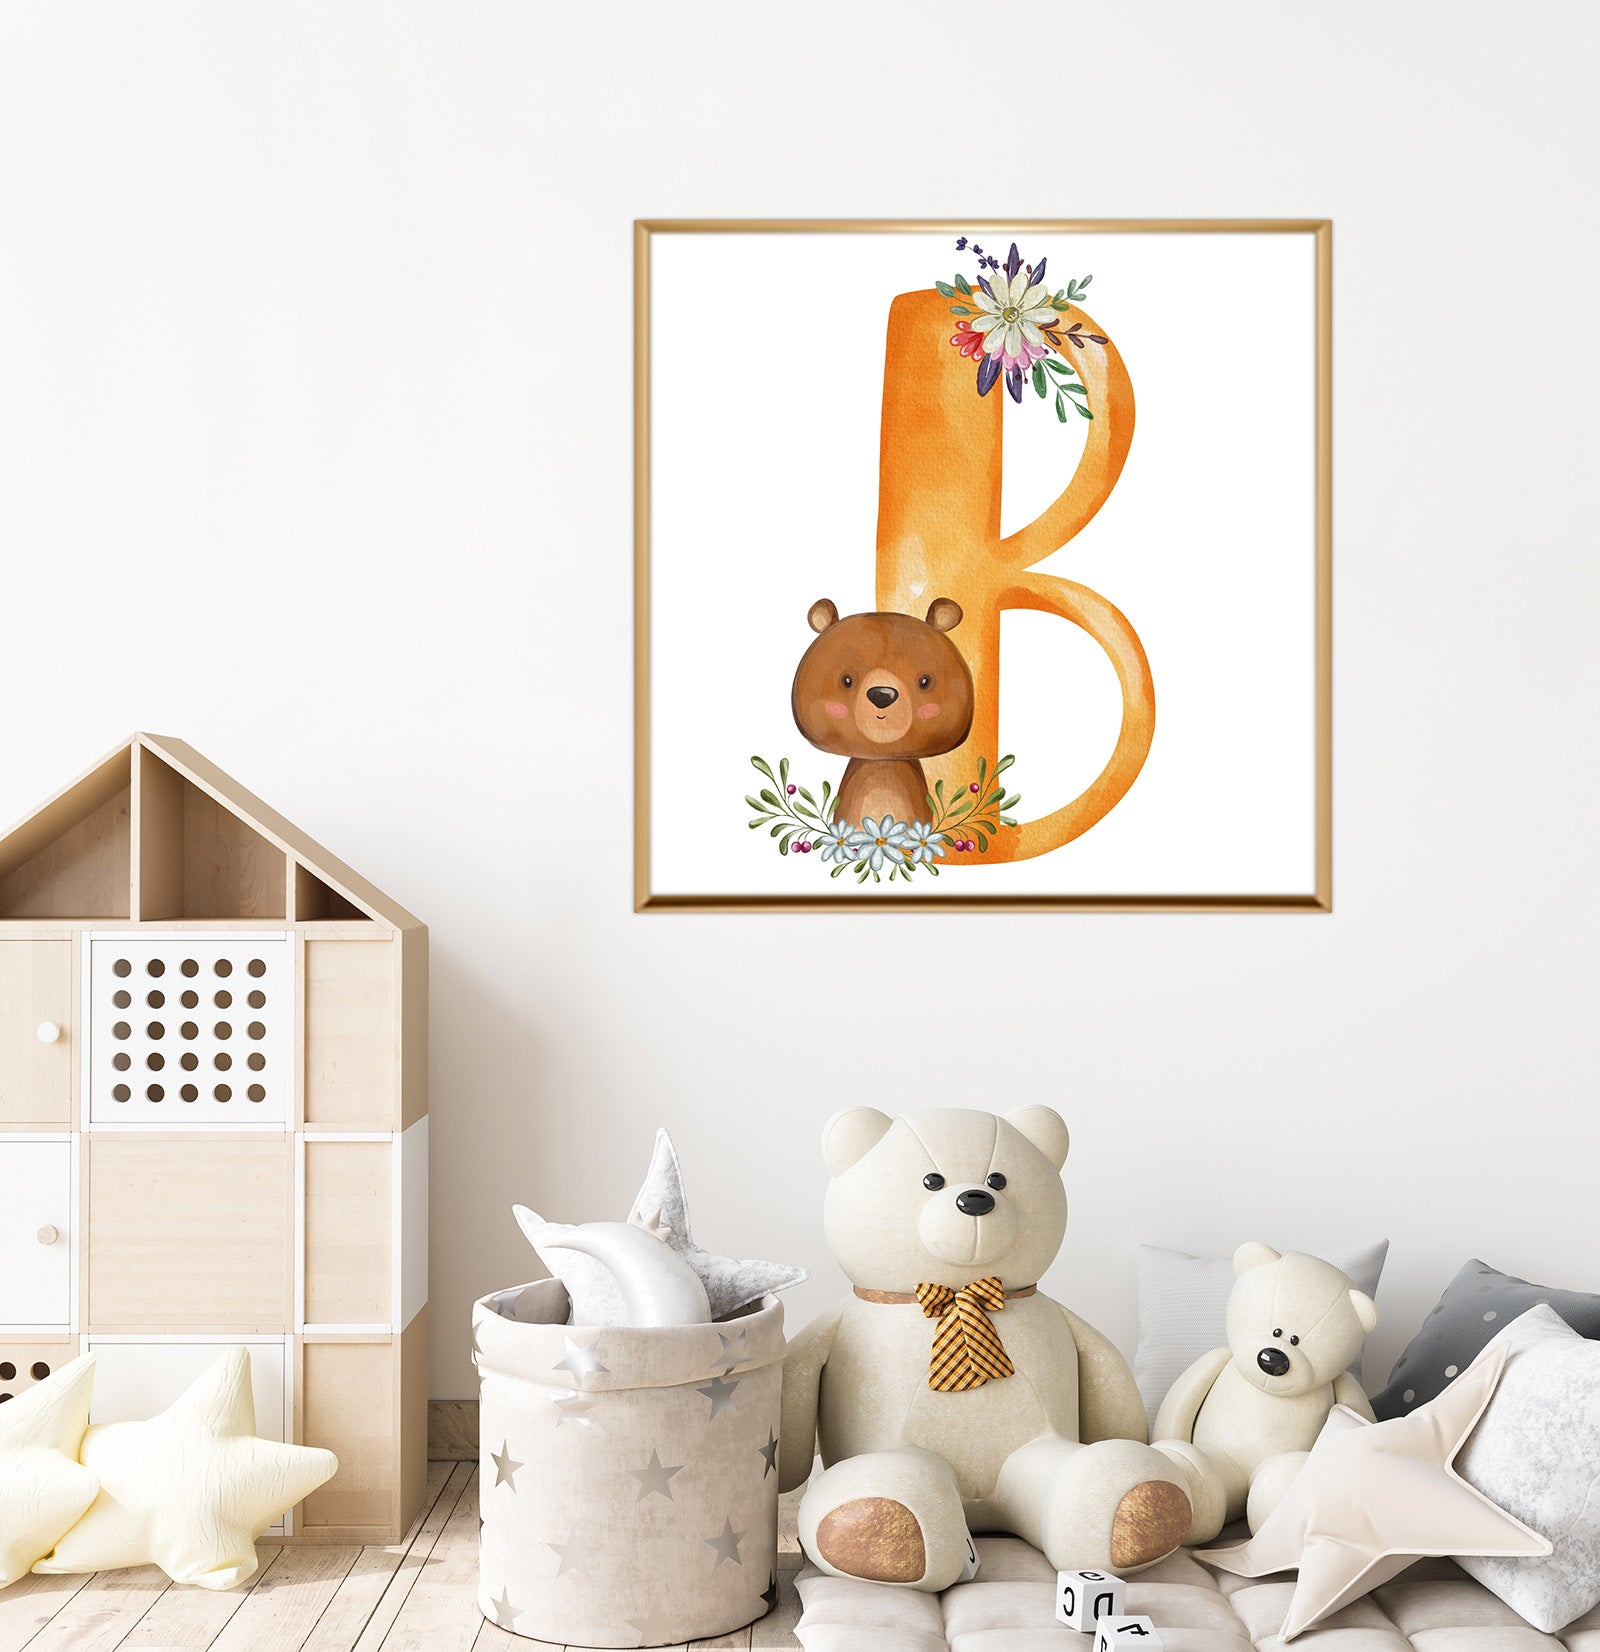 Wall Painting For Kids' Room (Letter B)